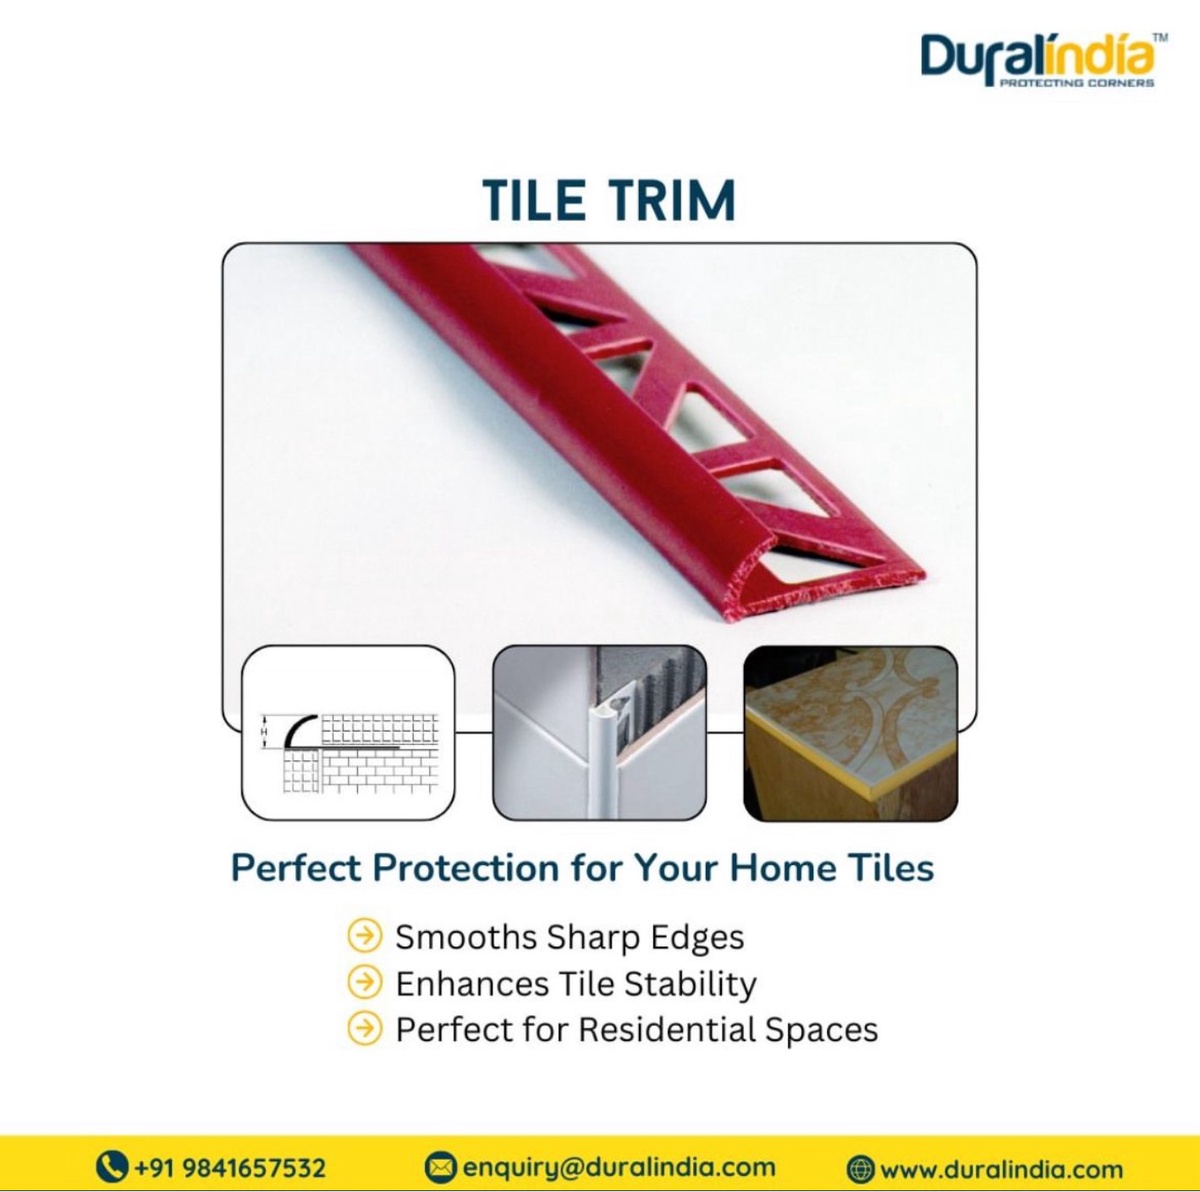 Tile Trim: Enhance Safety & Style in Your home